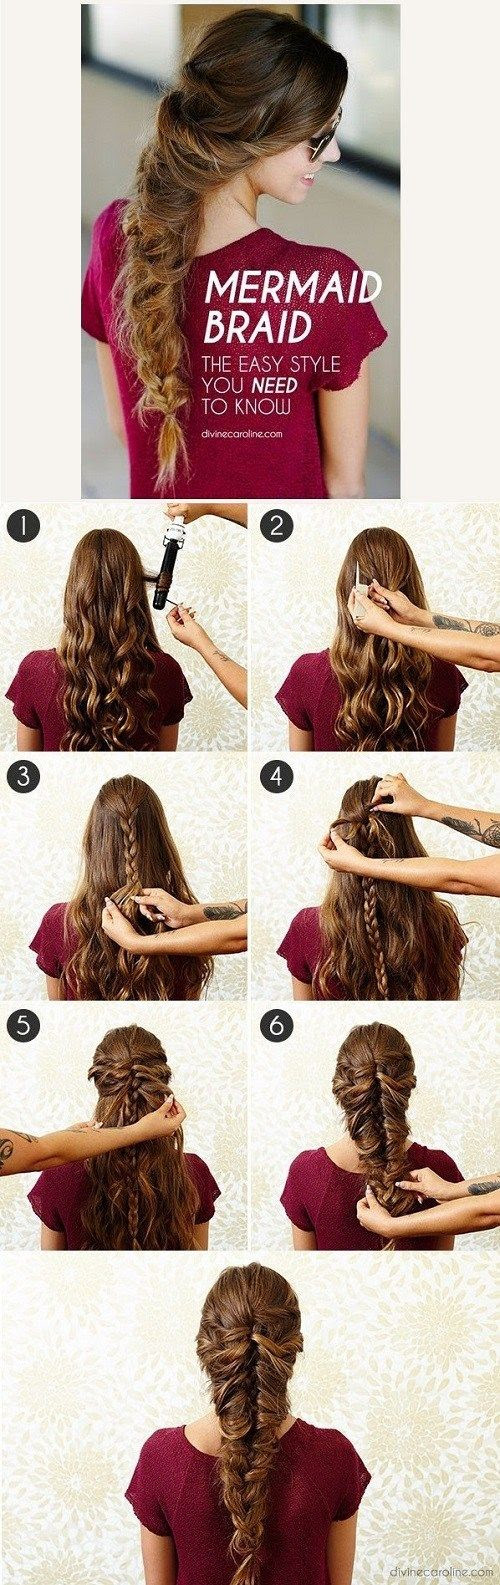 How To S Wiki 88 How To Braid Hair Step By Step